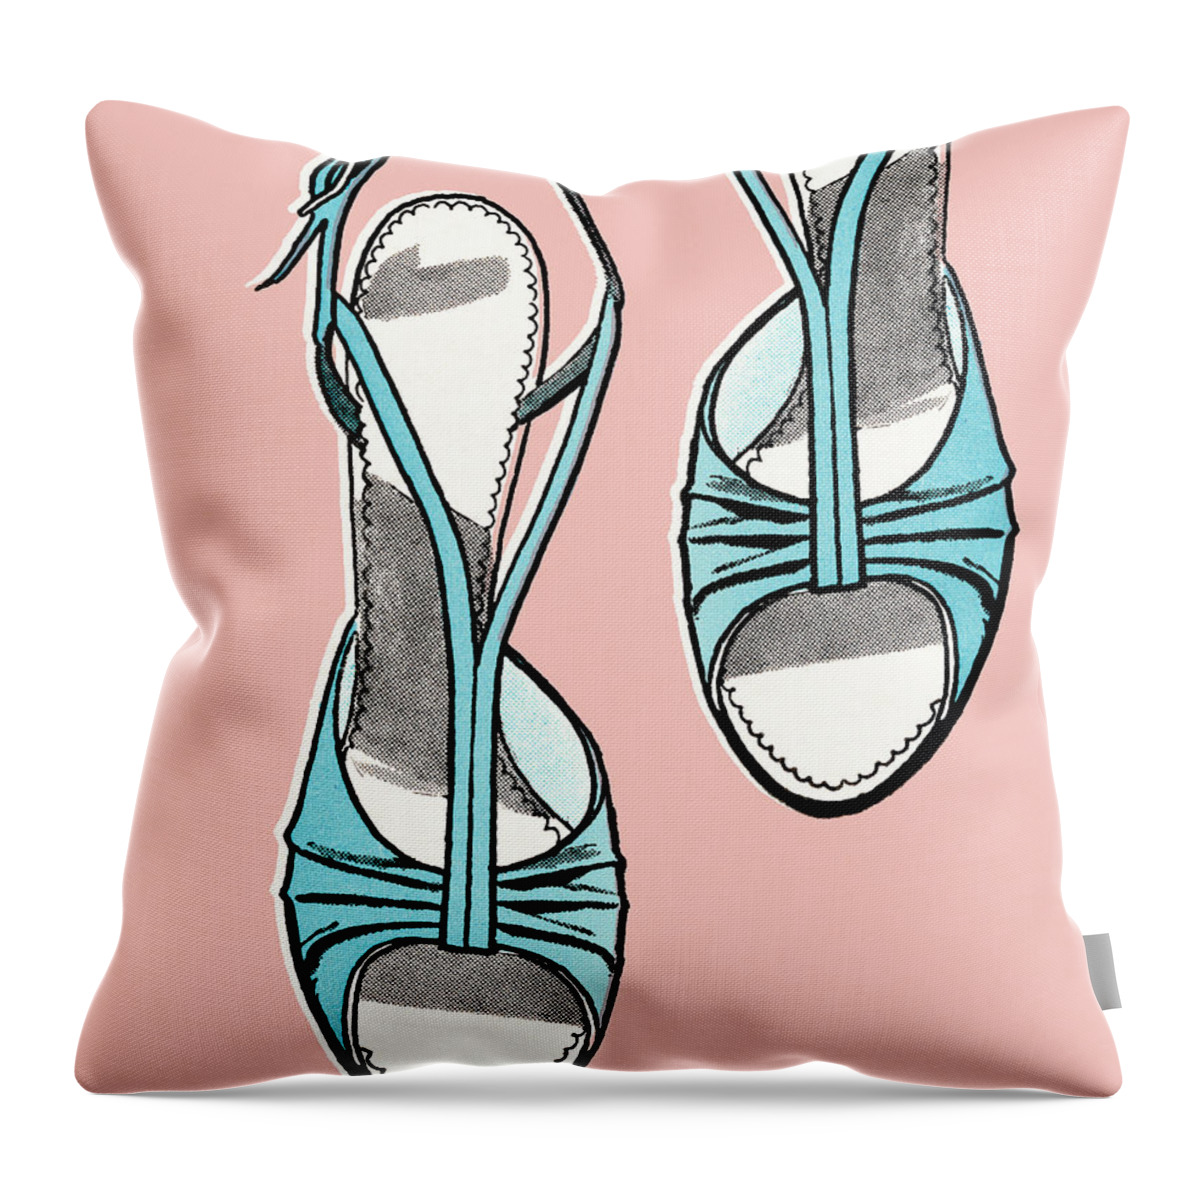 Accessories Throw Pillow featuring the drawing High-heeled sandals by CSA Images